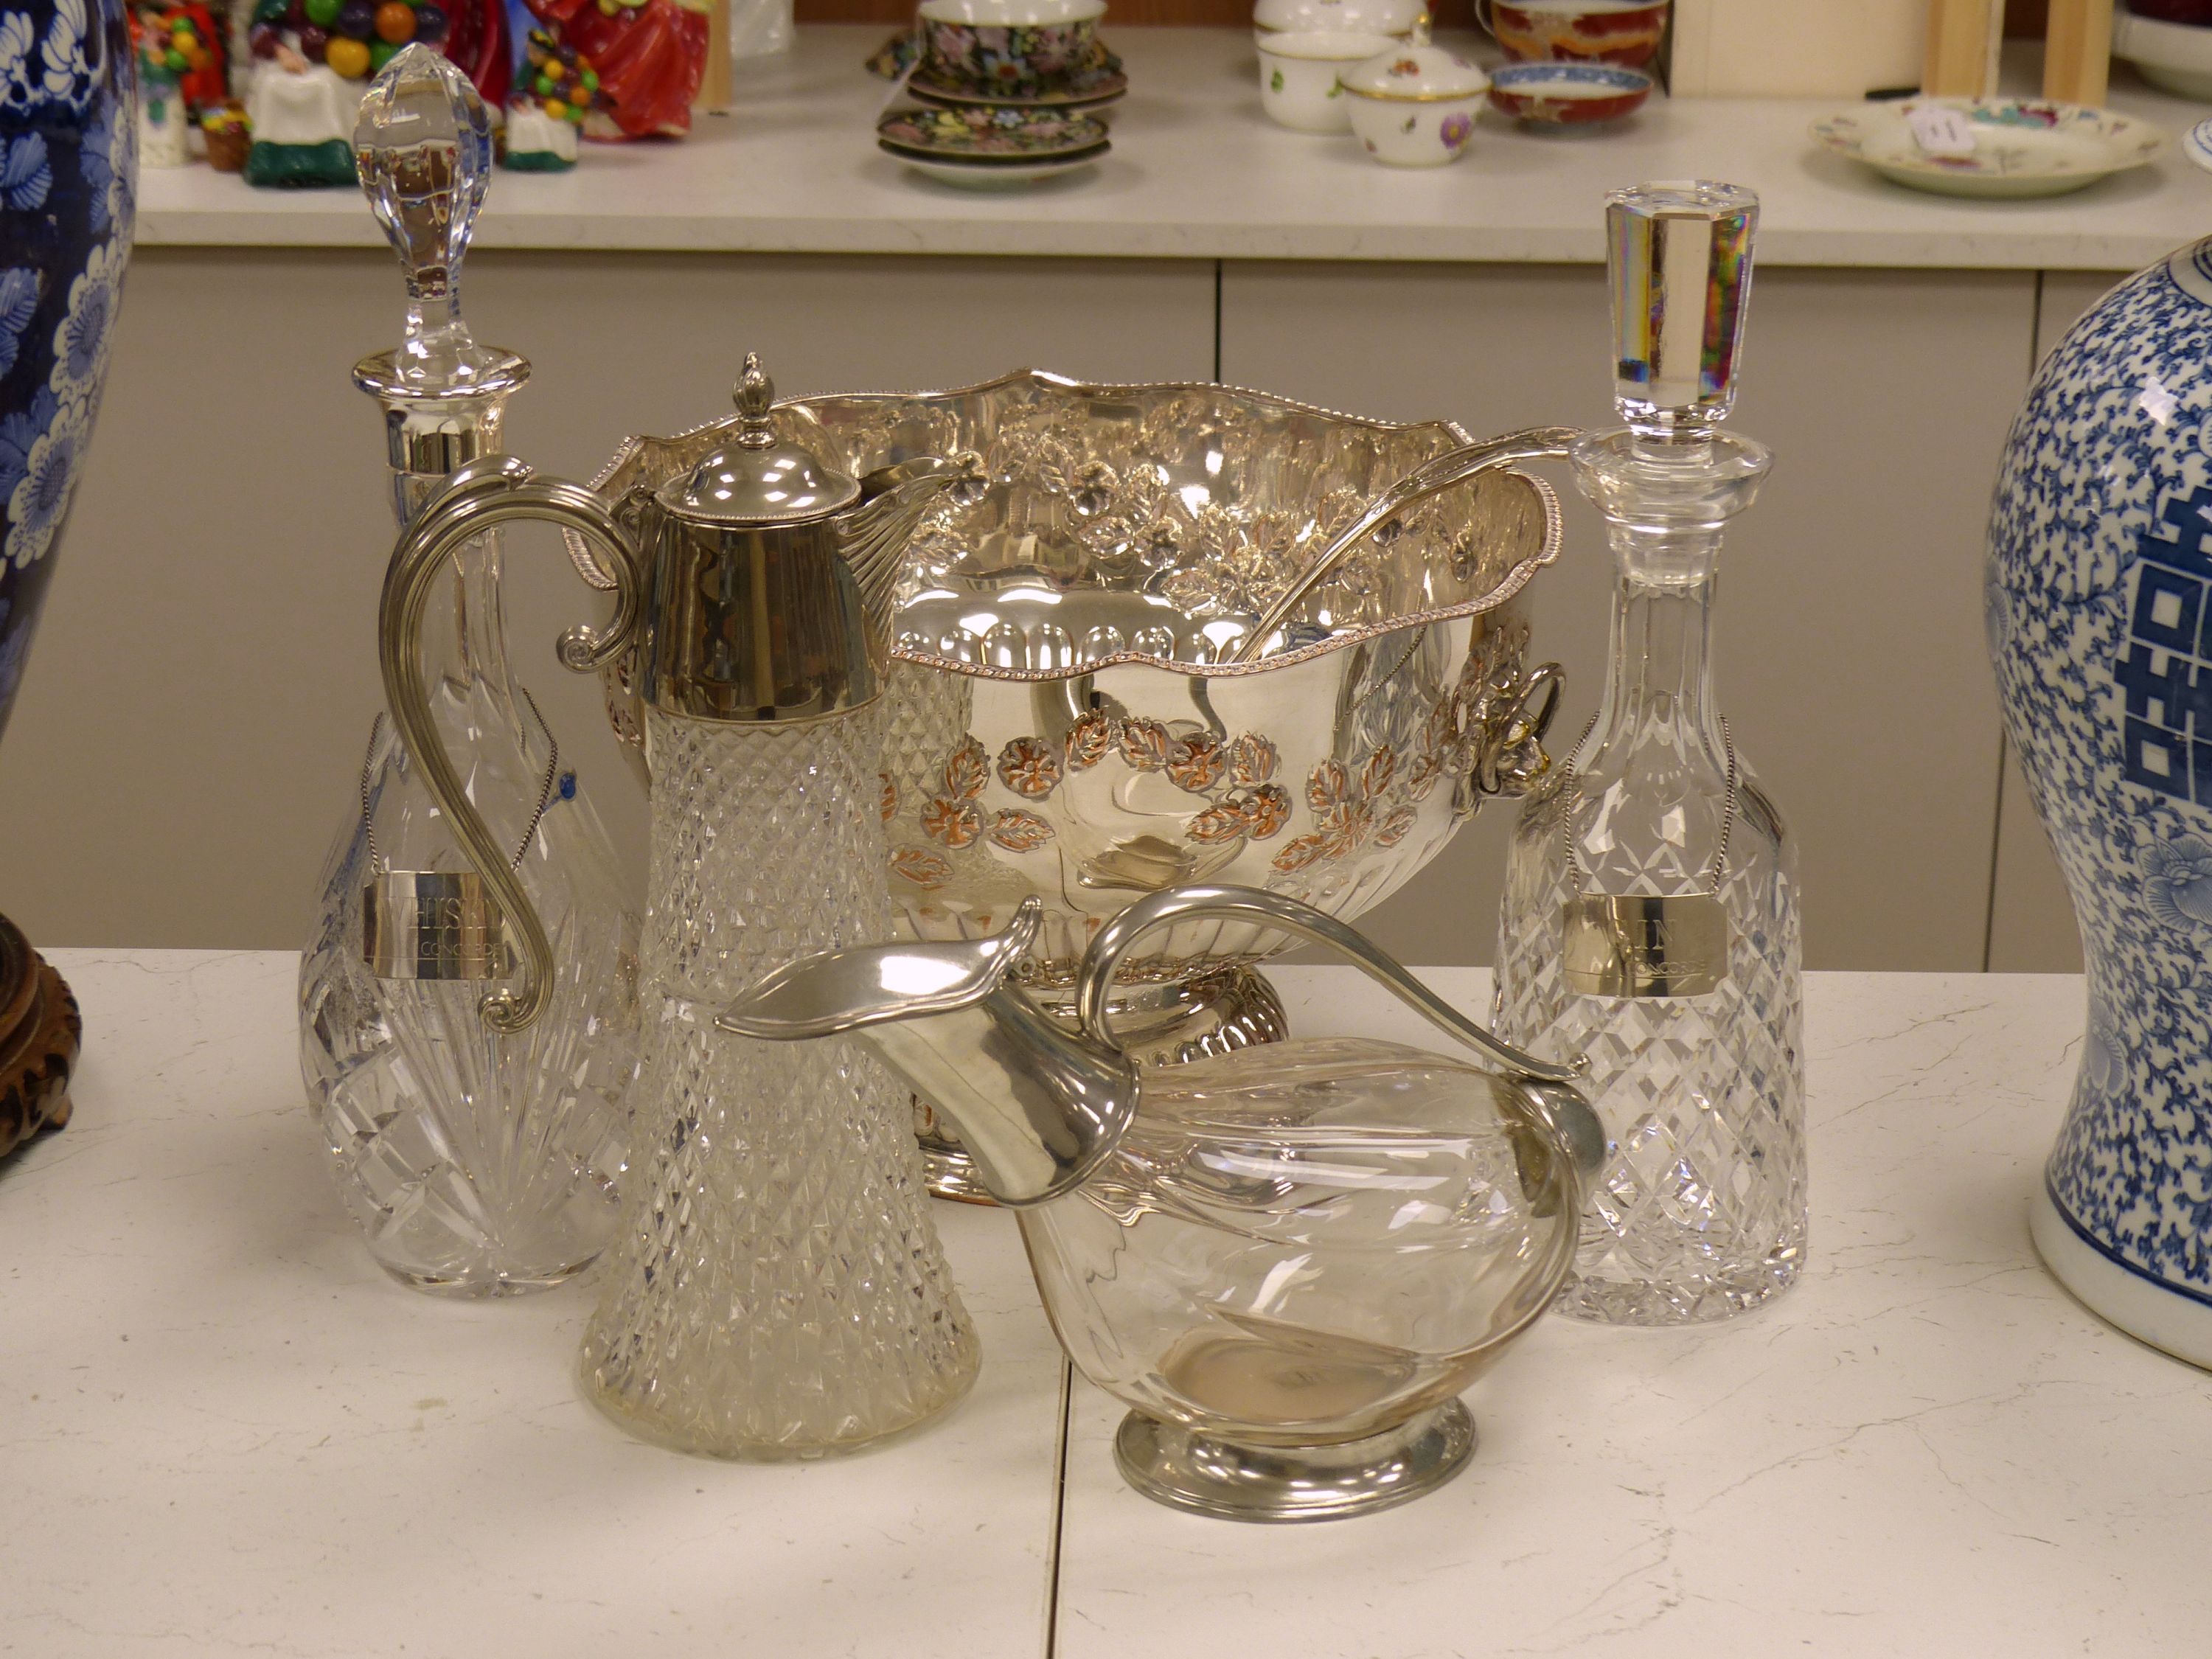 Two cut glass decanters (one silver-mounted), two silver Whisky and Gin labels, an 'Etains du Manoir' duck shaped wine carafe and two other items